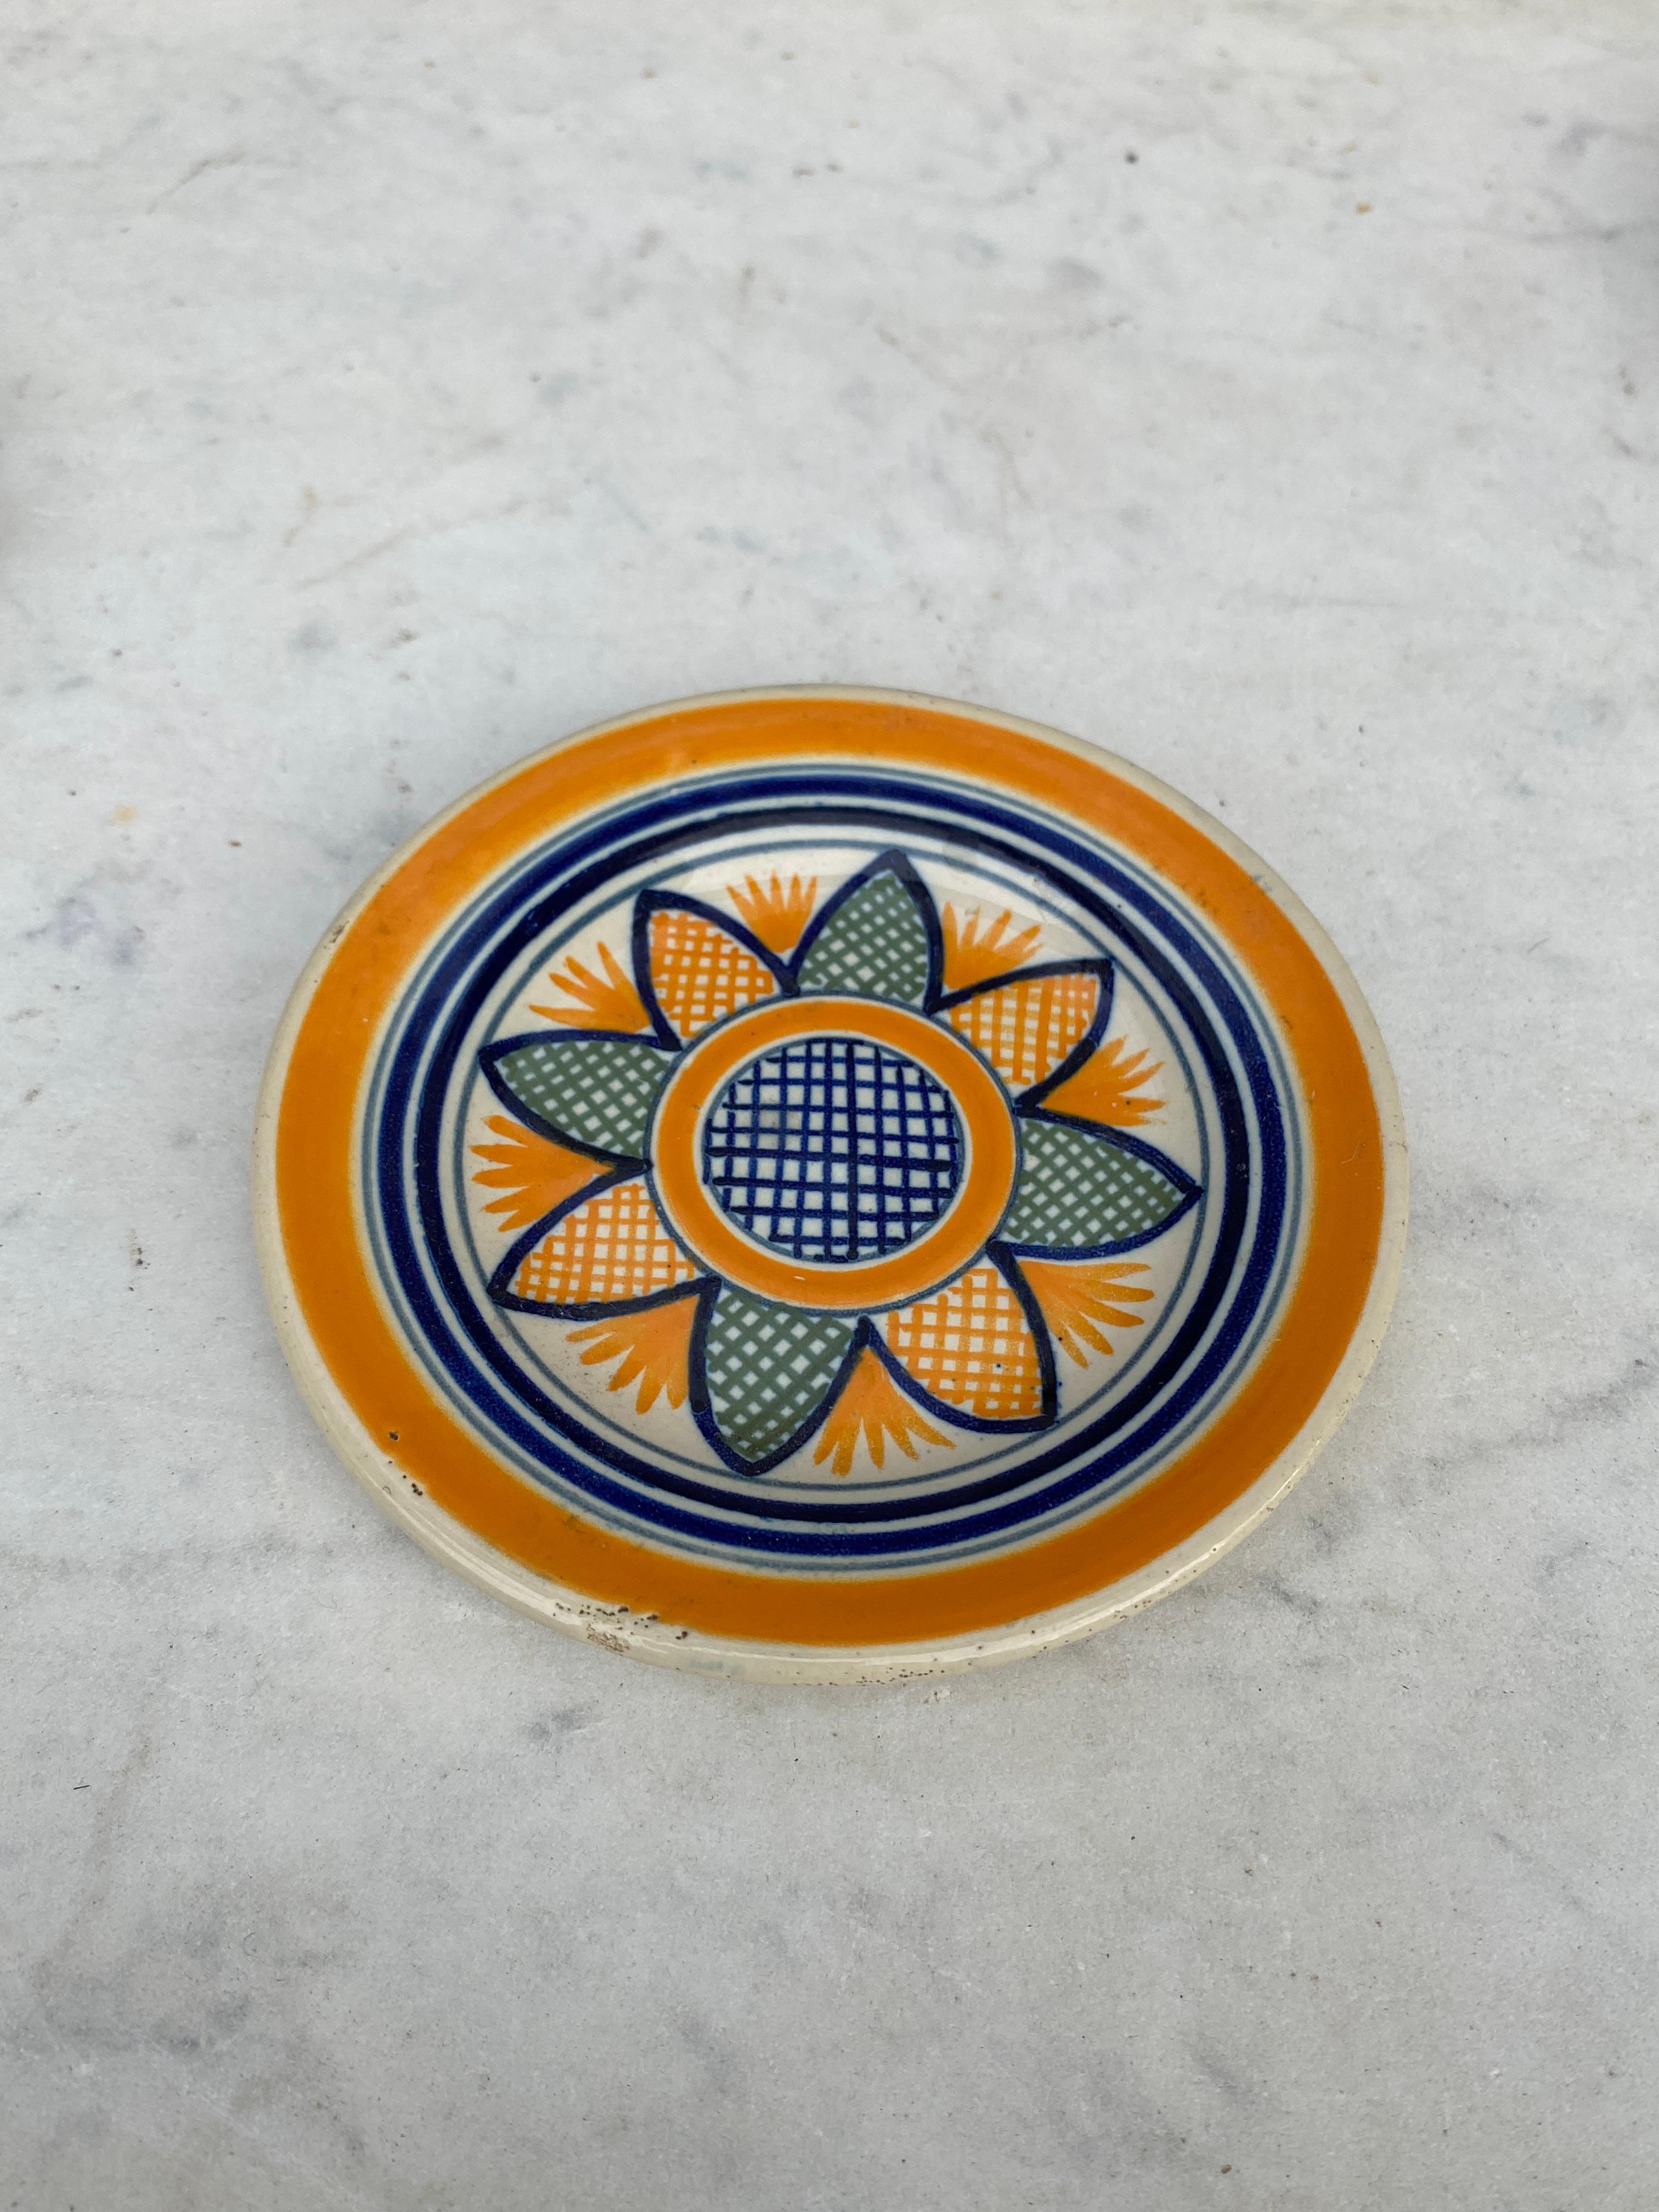 French Faience Butter Pat signed Henriot Quimper Circa 1930.